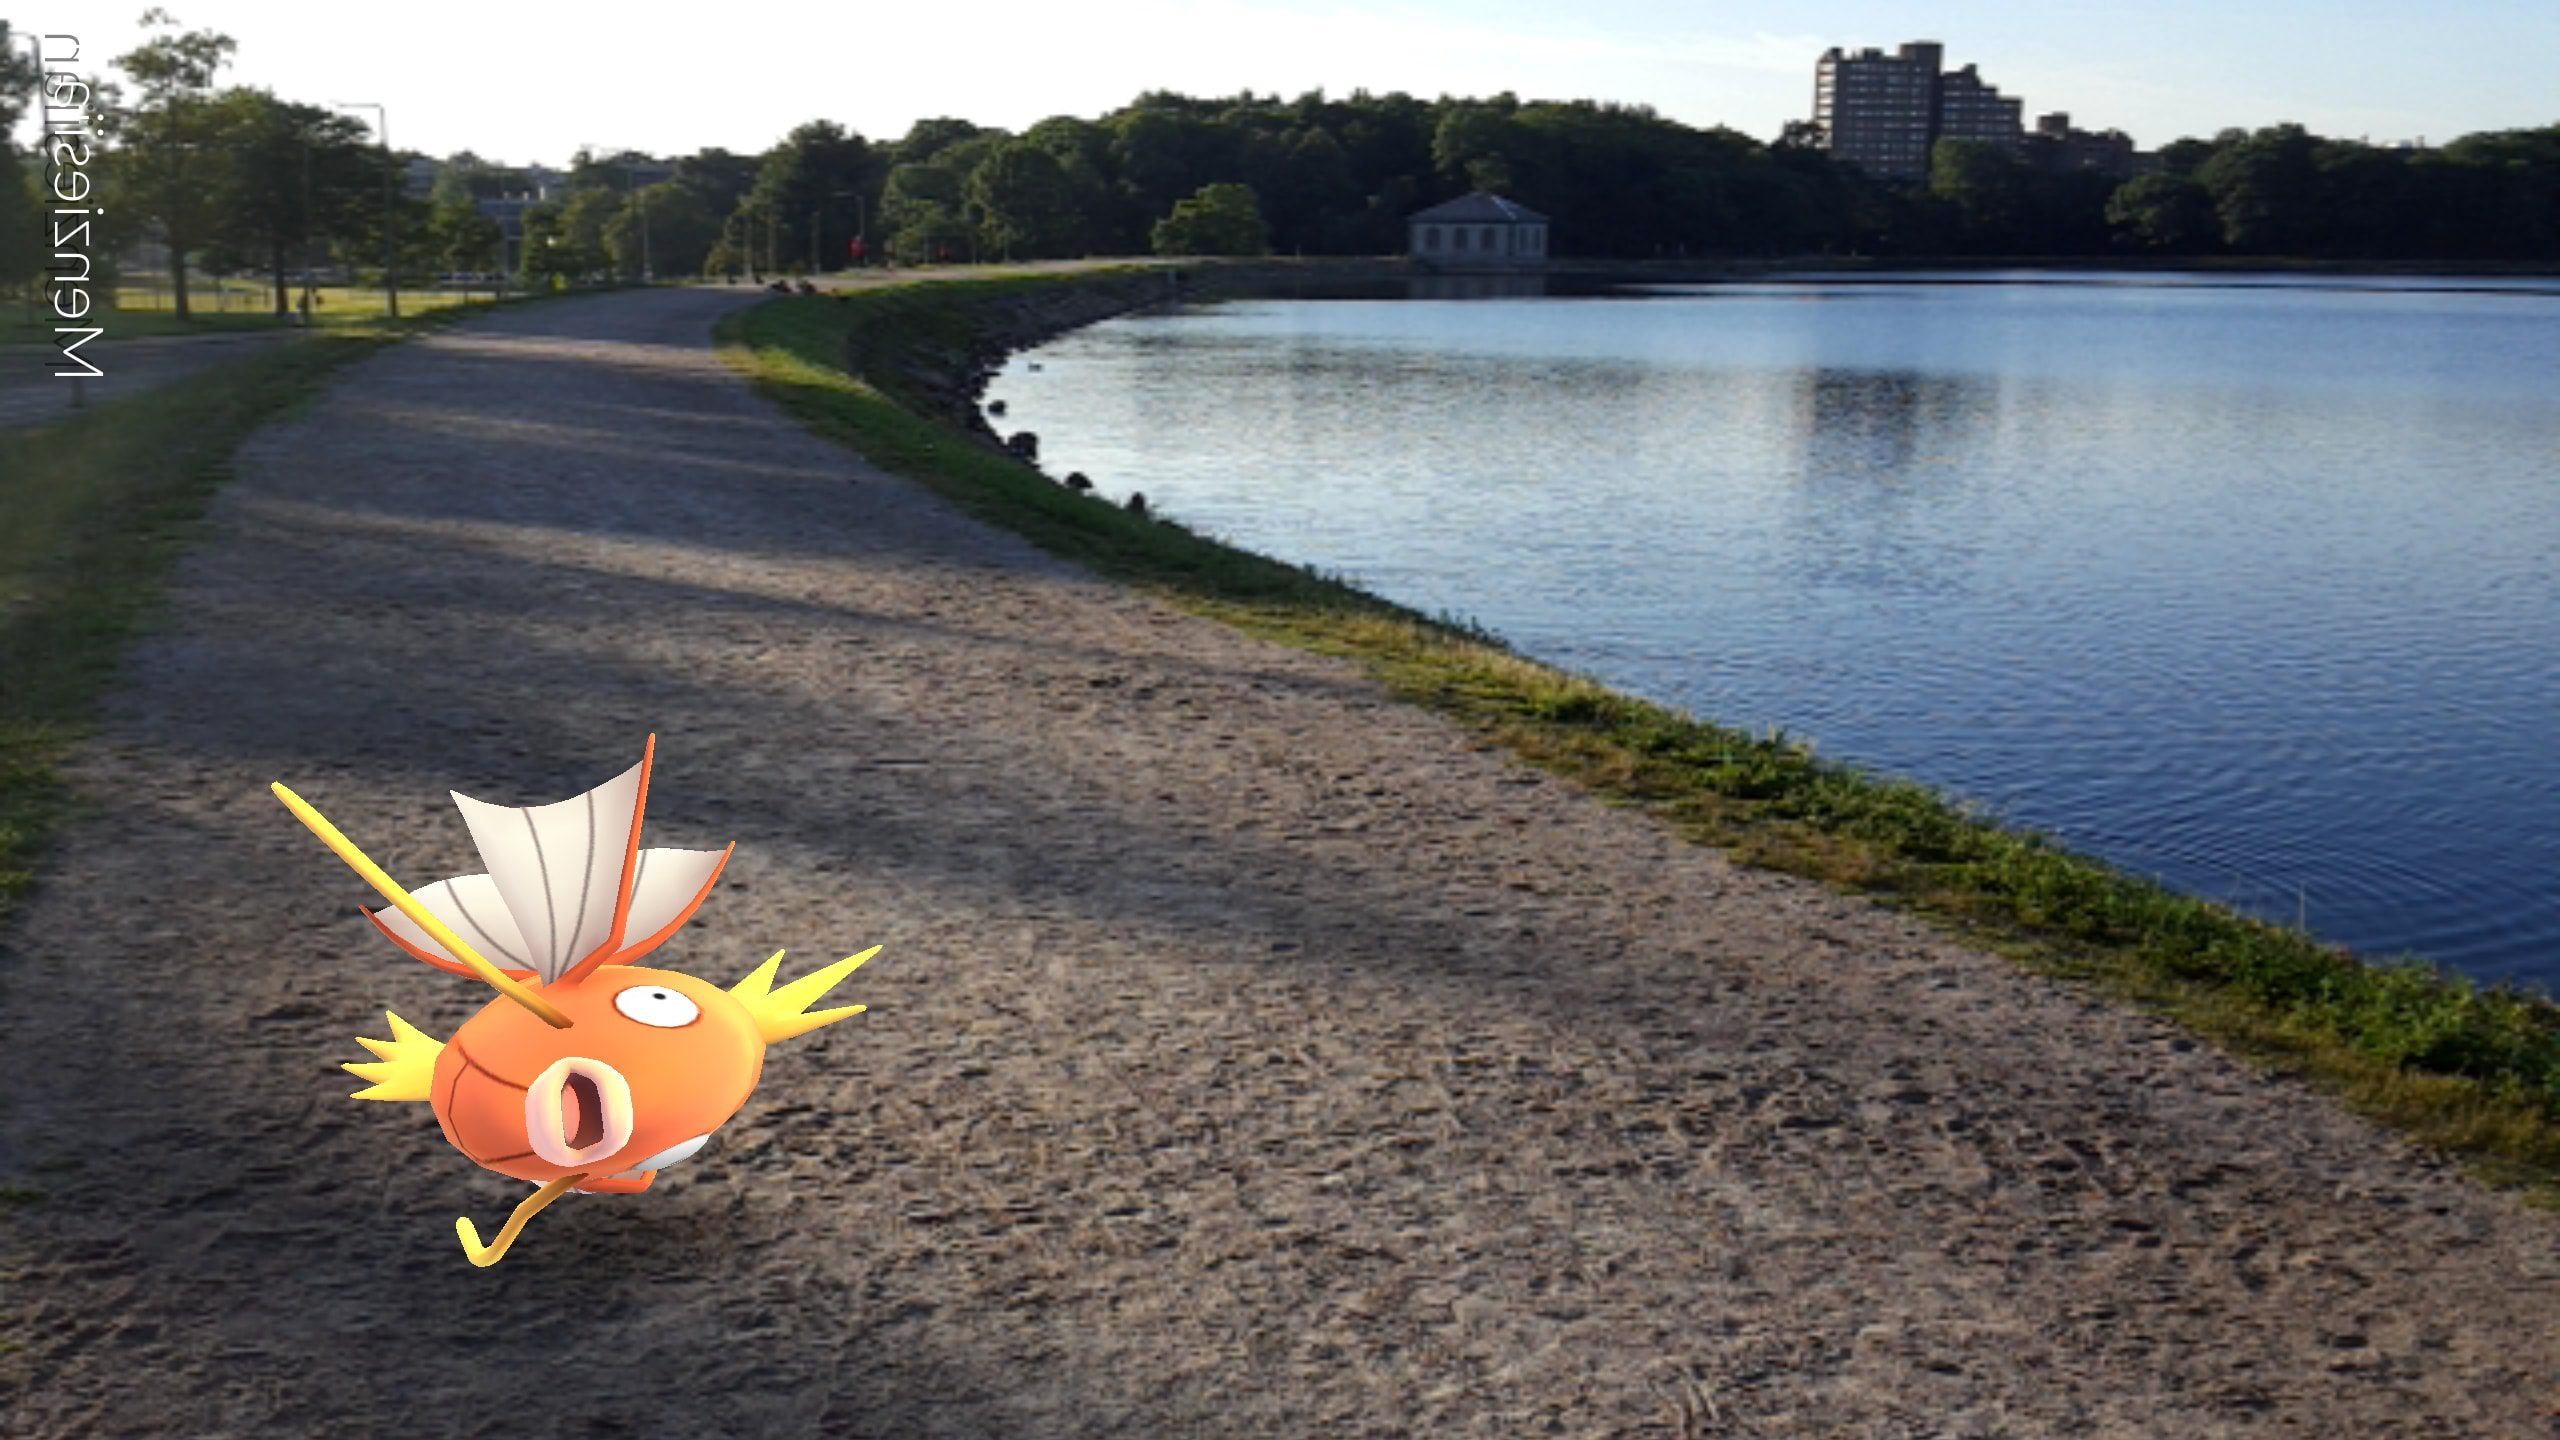 Pokémon Go may seem like augmented reality, but according to some researchers, it's not quite there yet.